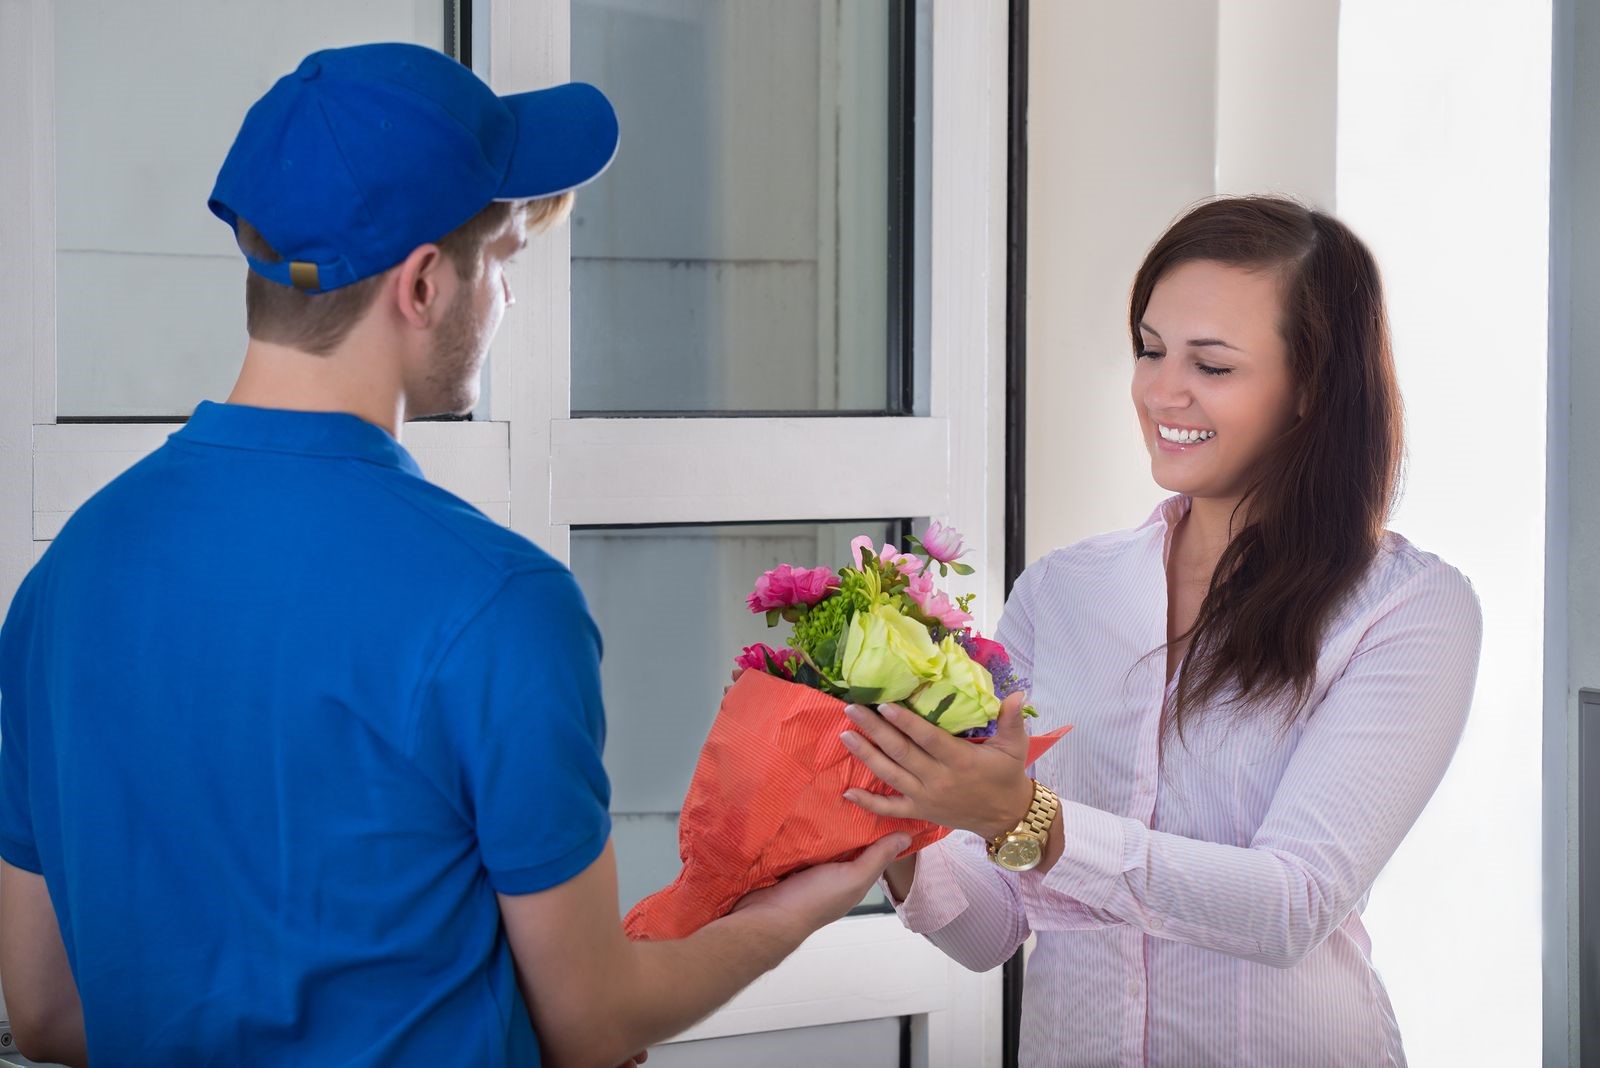 Smiling woman receives flowers from same day flower delivery service